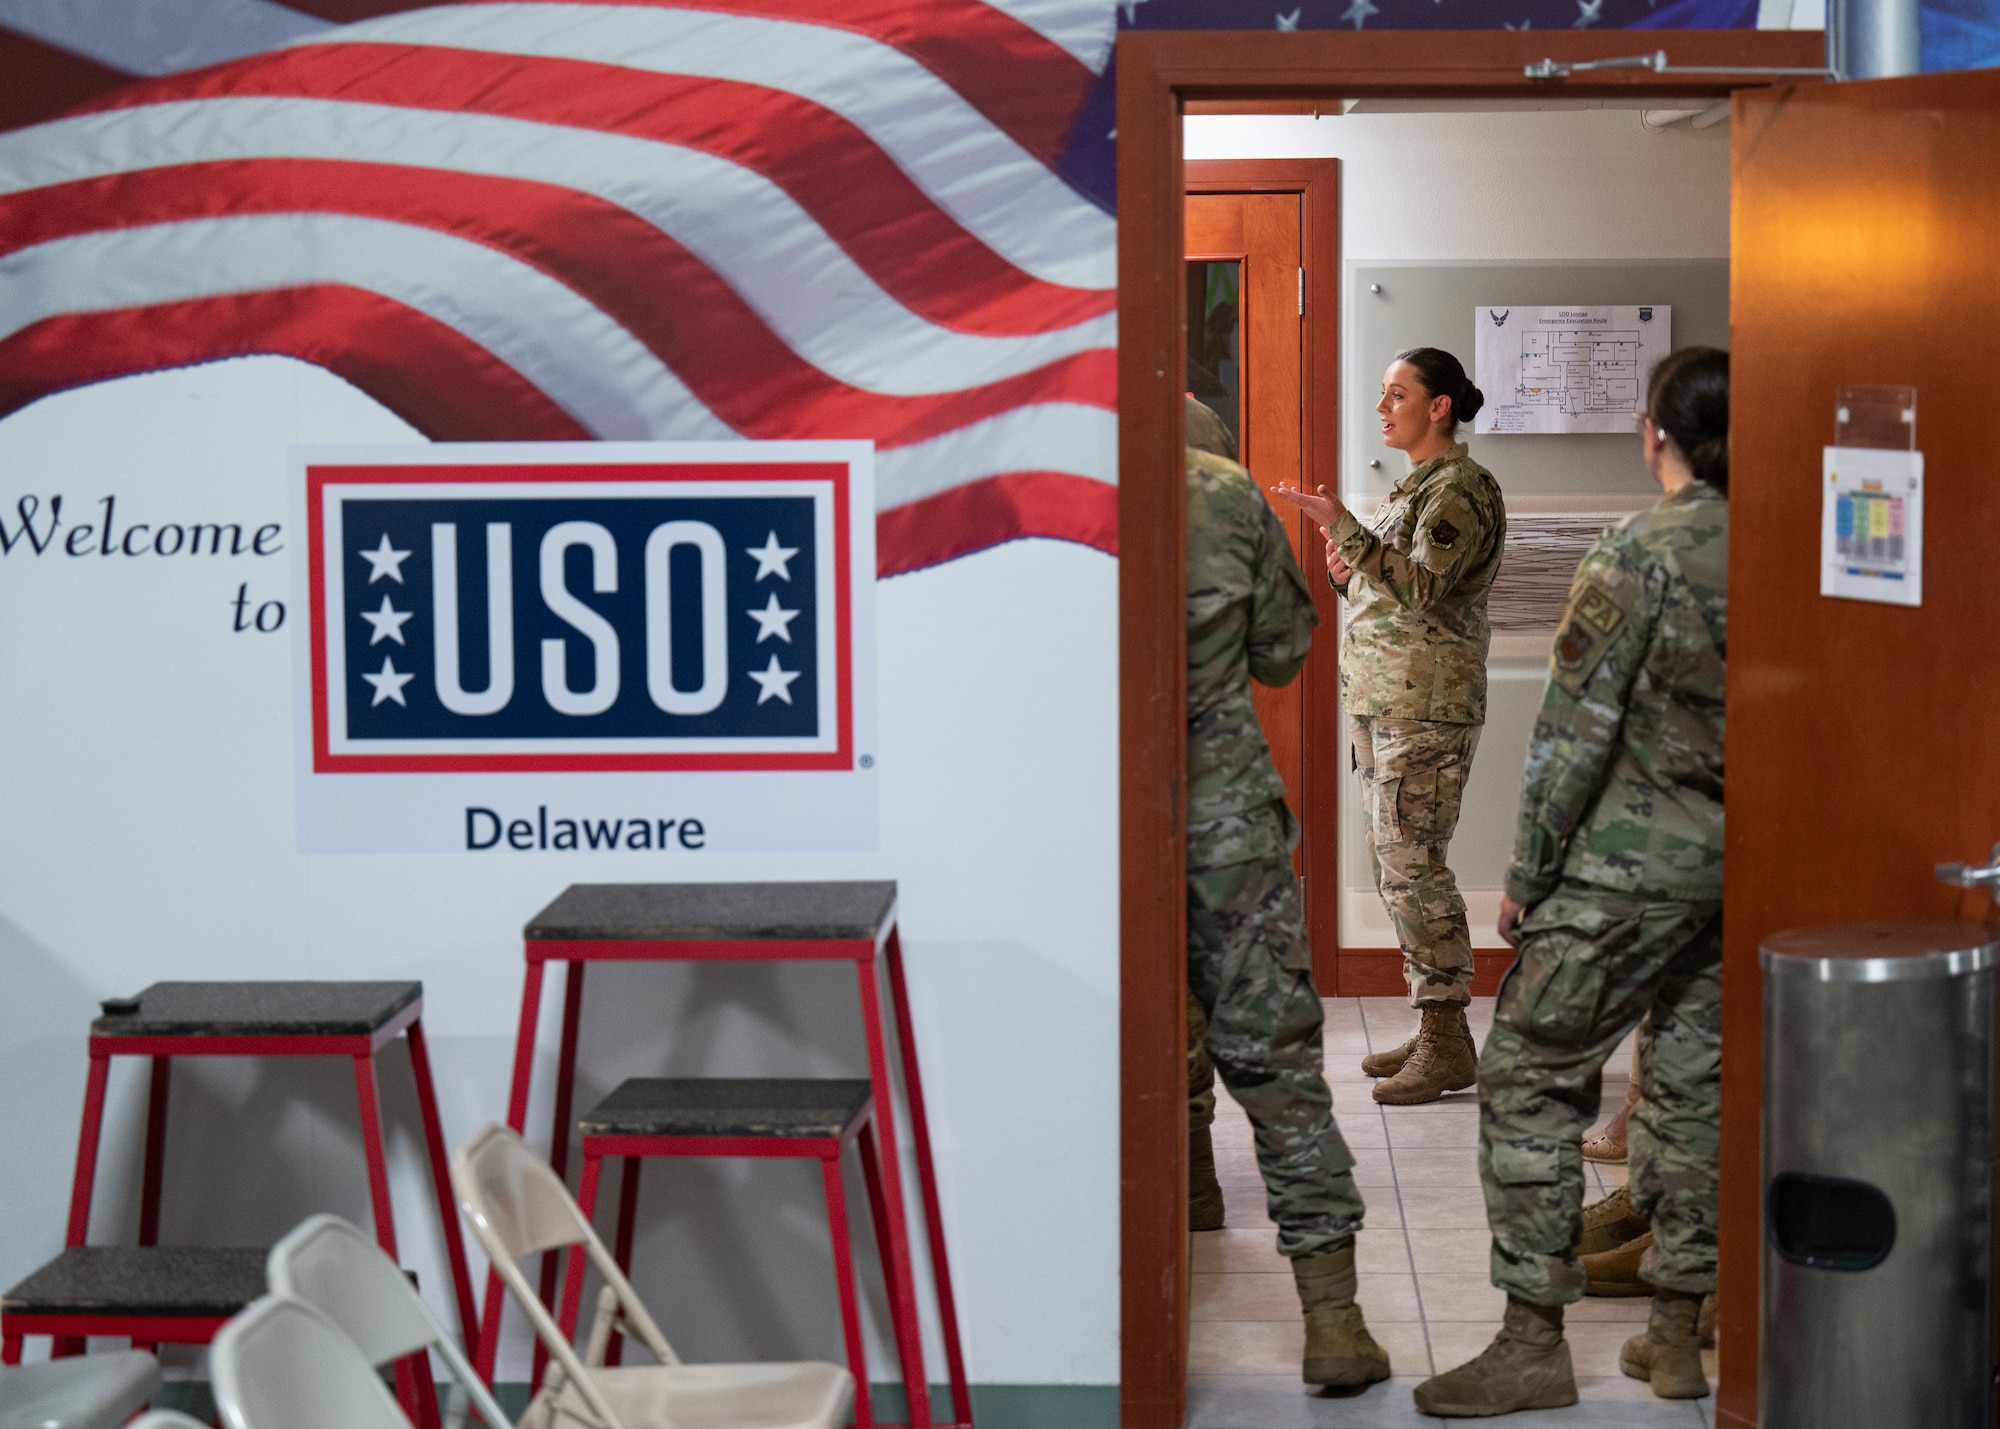 An Airman stands in the doorway of the USO.